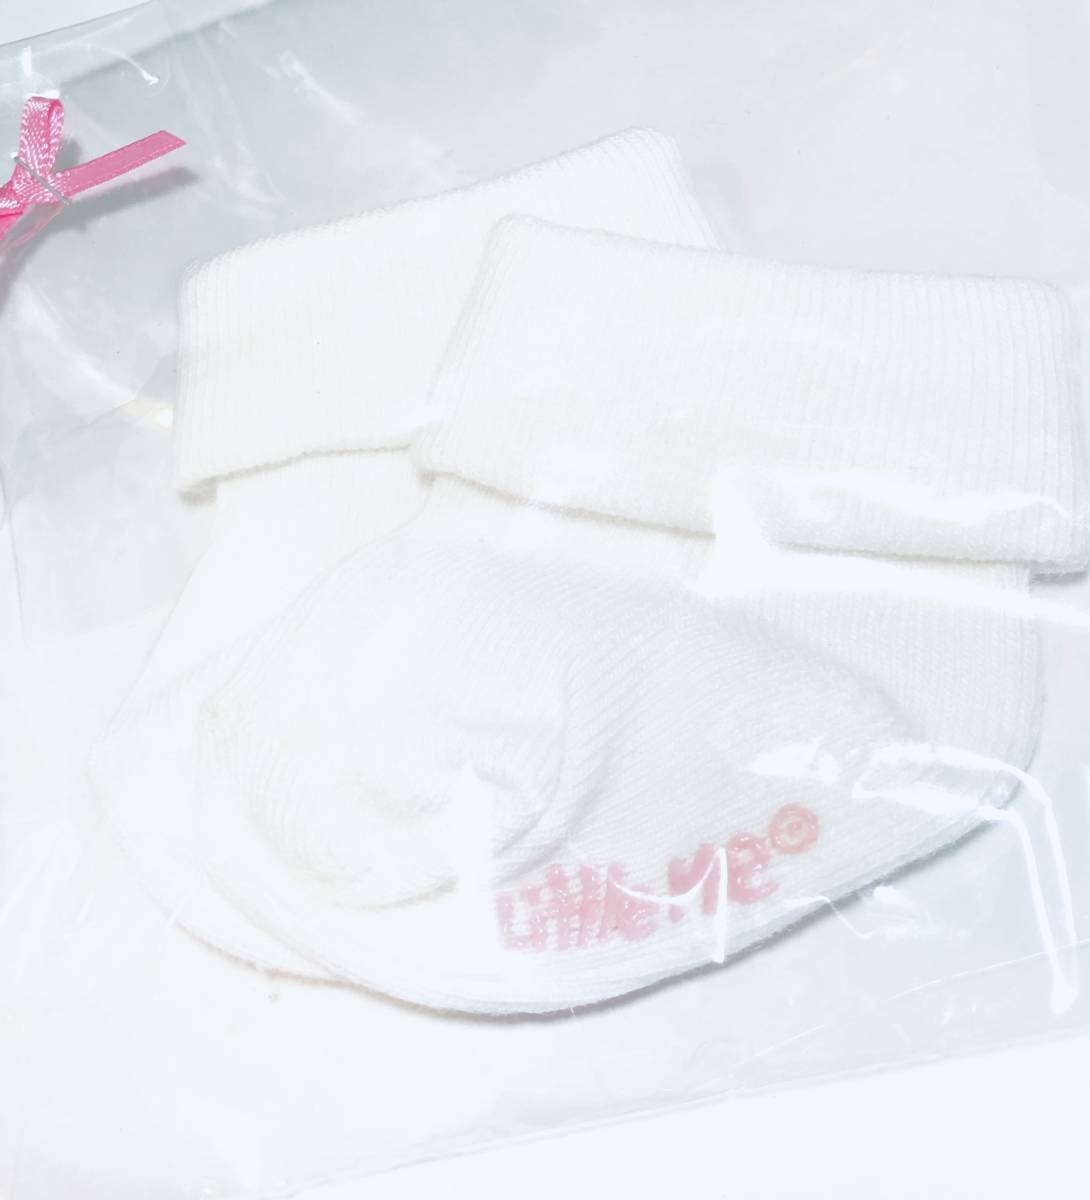  new goods America buy goods LITTLE ME baby socks ( white ) size 0-12month *4type another exhibition 